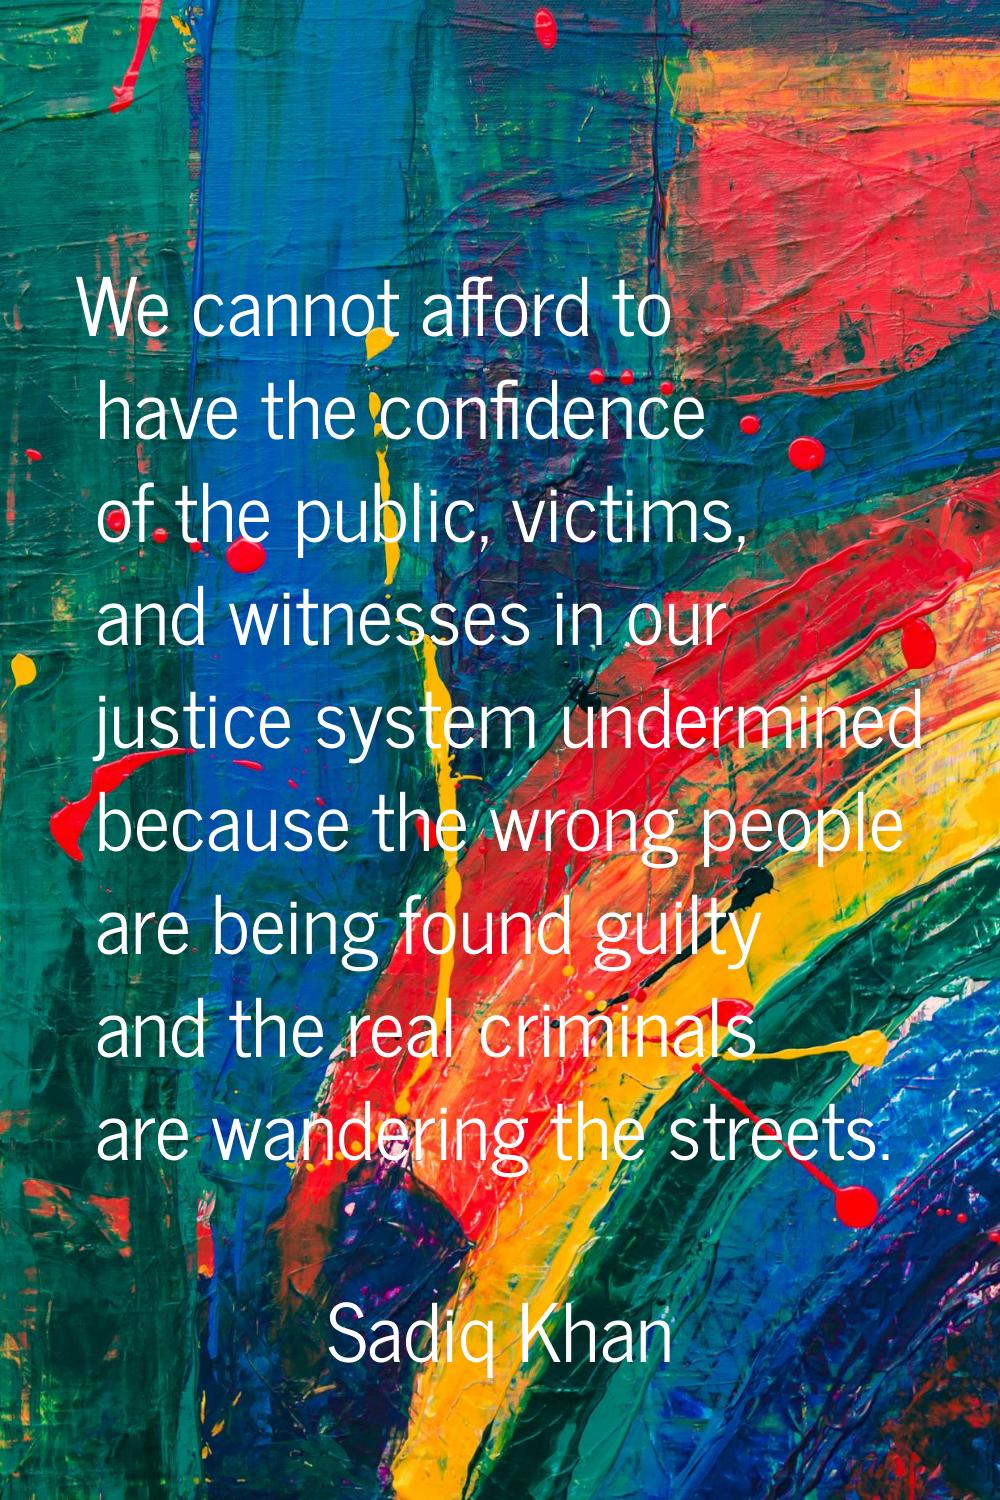 We cannot afford to have the confidence of the public, victims, and witnesses in our justice system